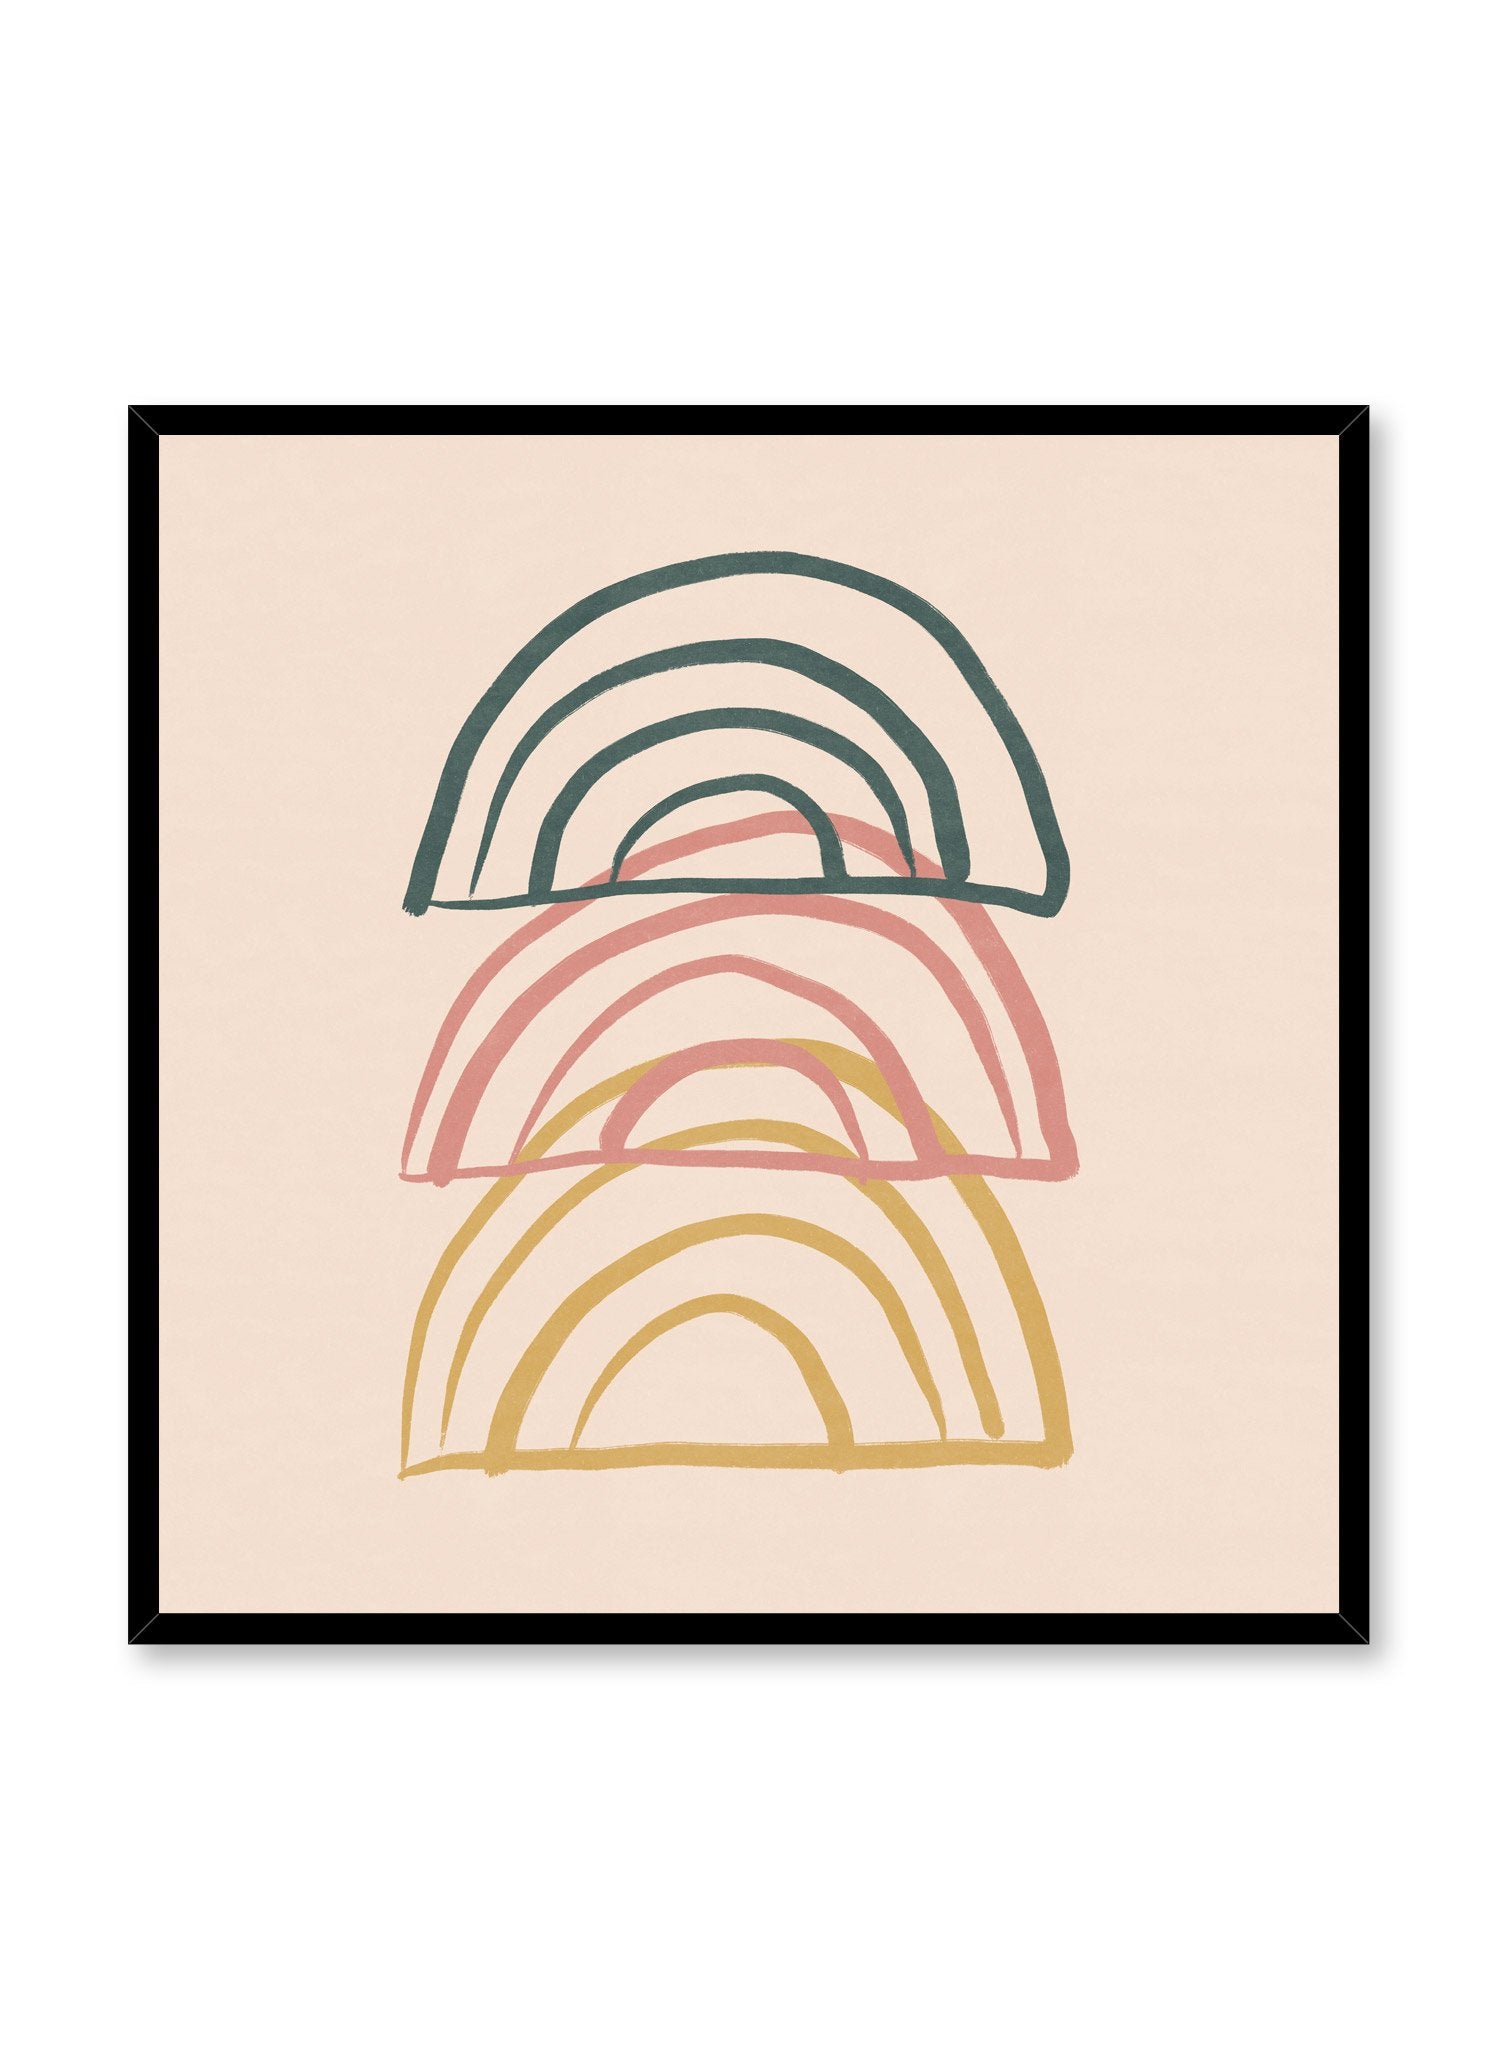 Modern minimalist poster by Opposite Wall with abstract design of Deconstructed Rainbow by Toffie Affichiste in square format